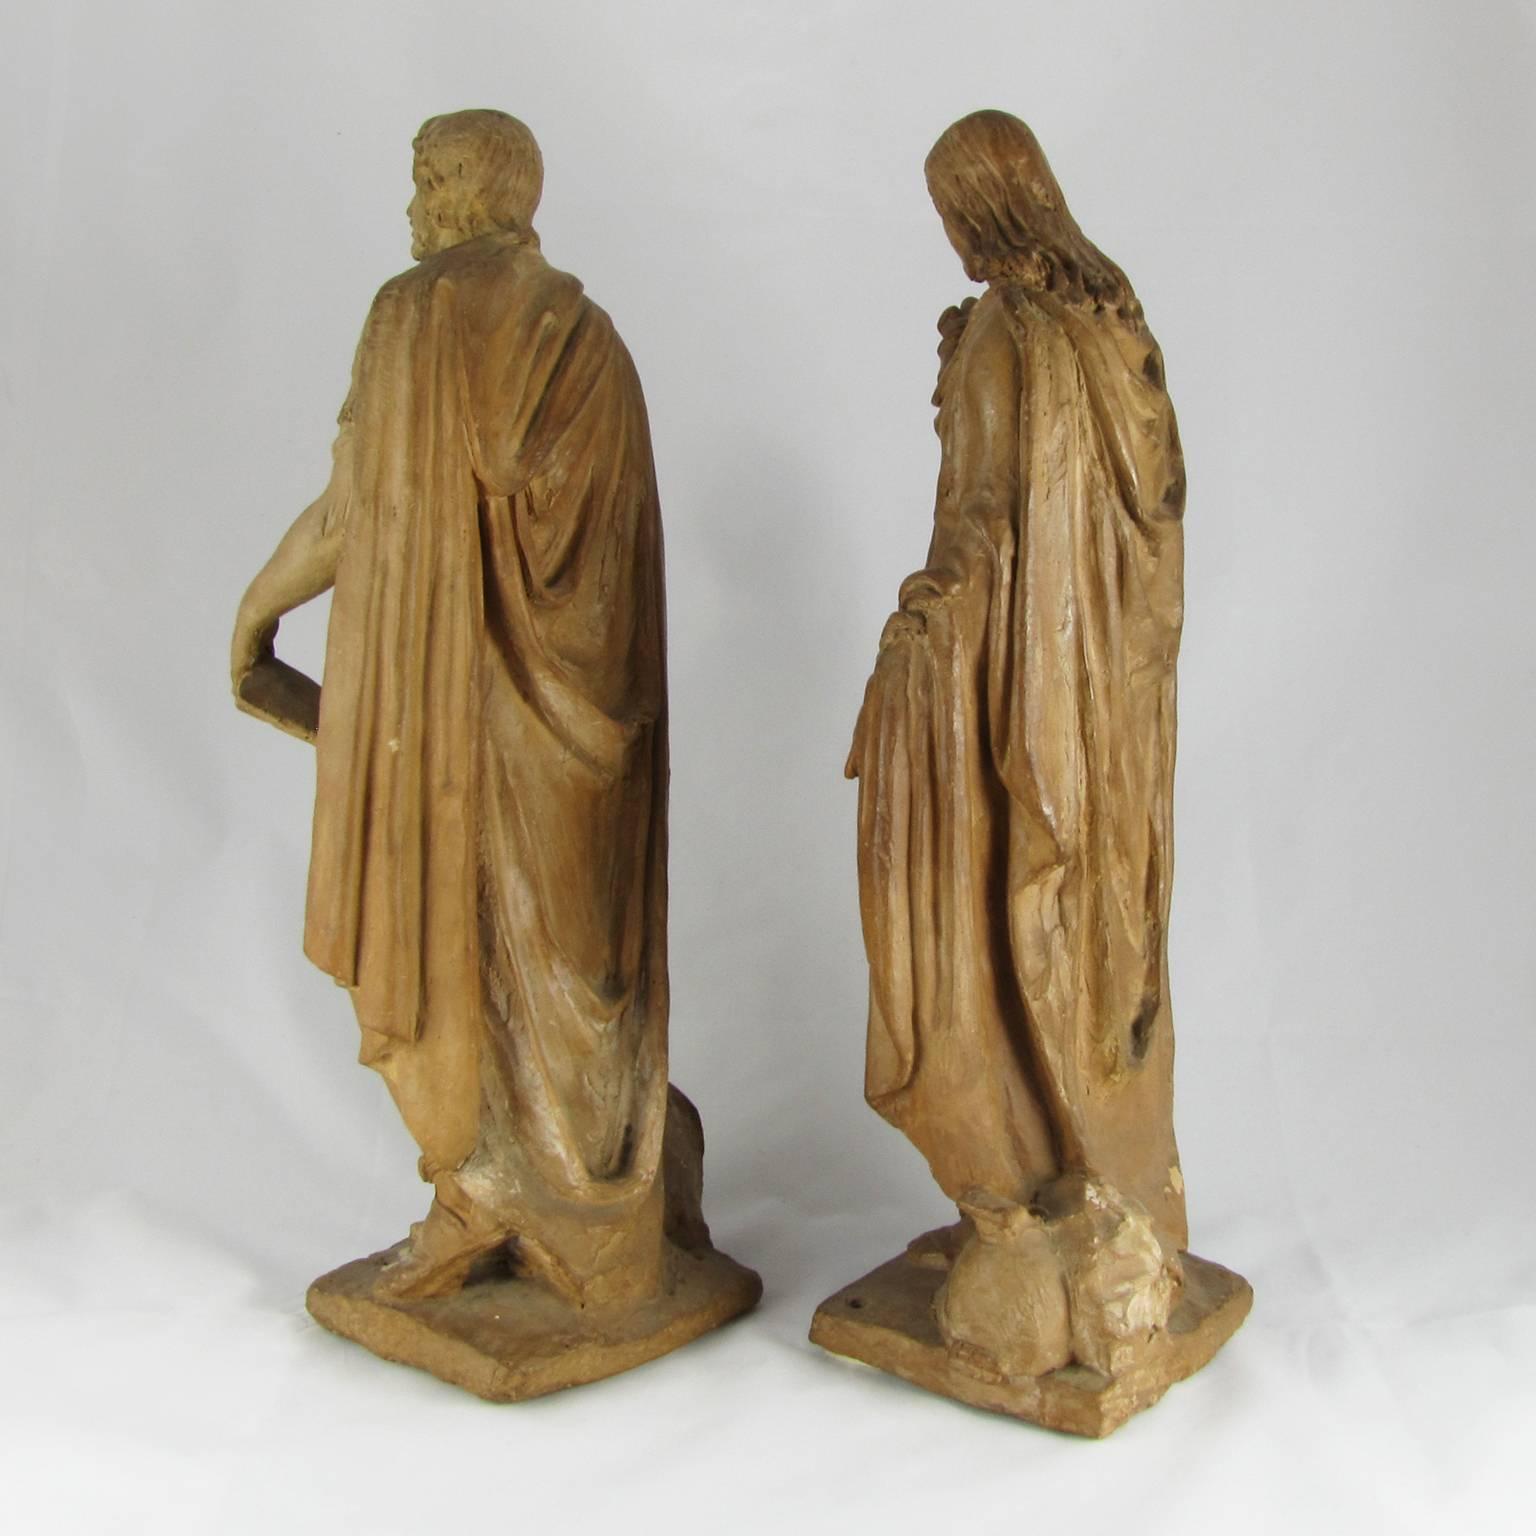 Two Early 18th Century Italian Unglazed Terracotta Sculptures Depicting Saints 3